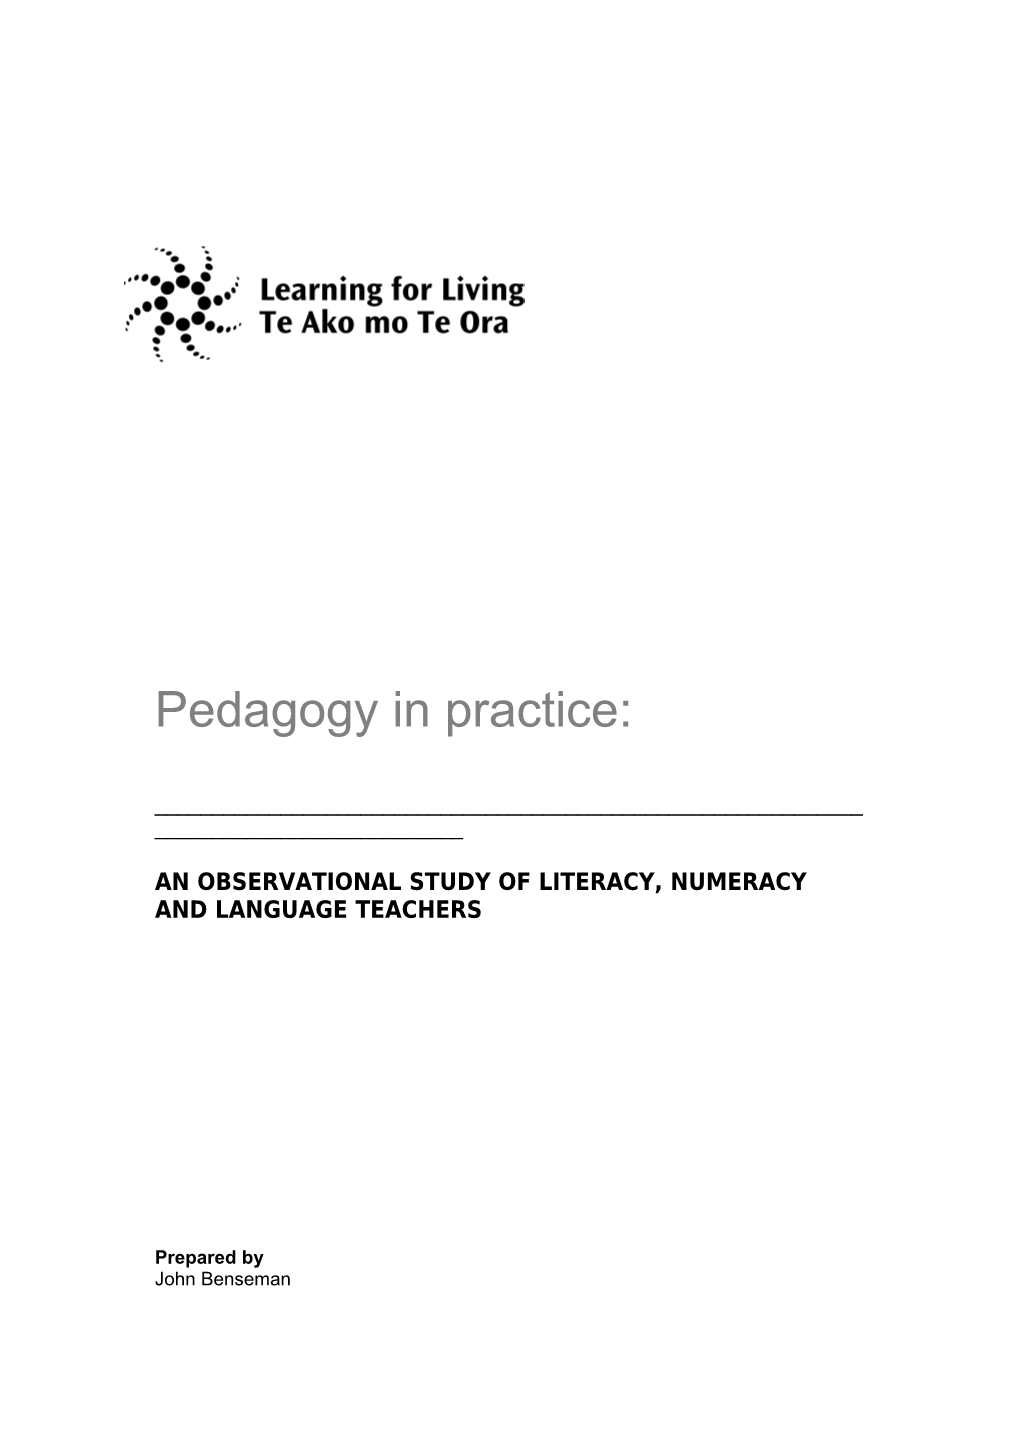 Pedagogy in Practice: an Observational Study of Literacy, Numeracy and Language Teachers